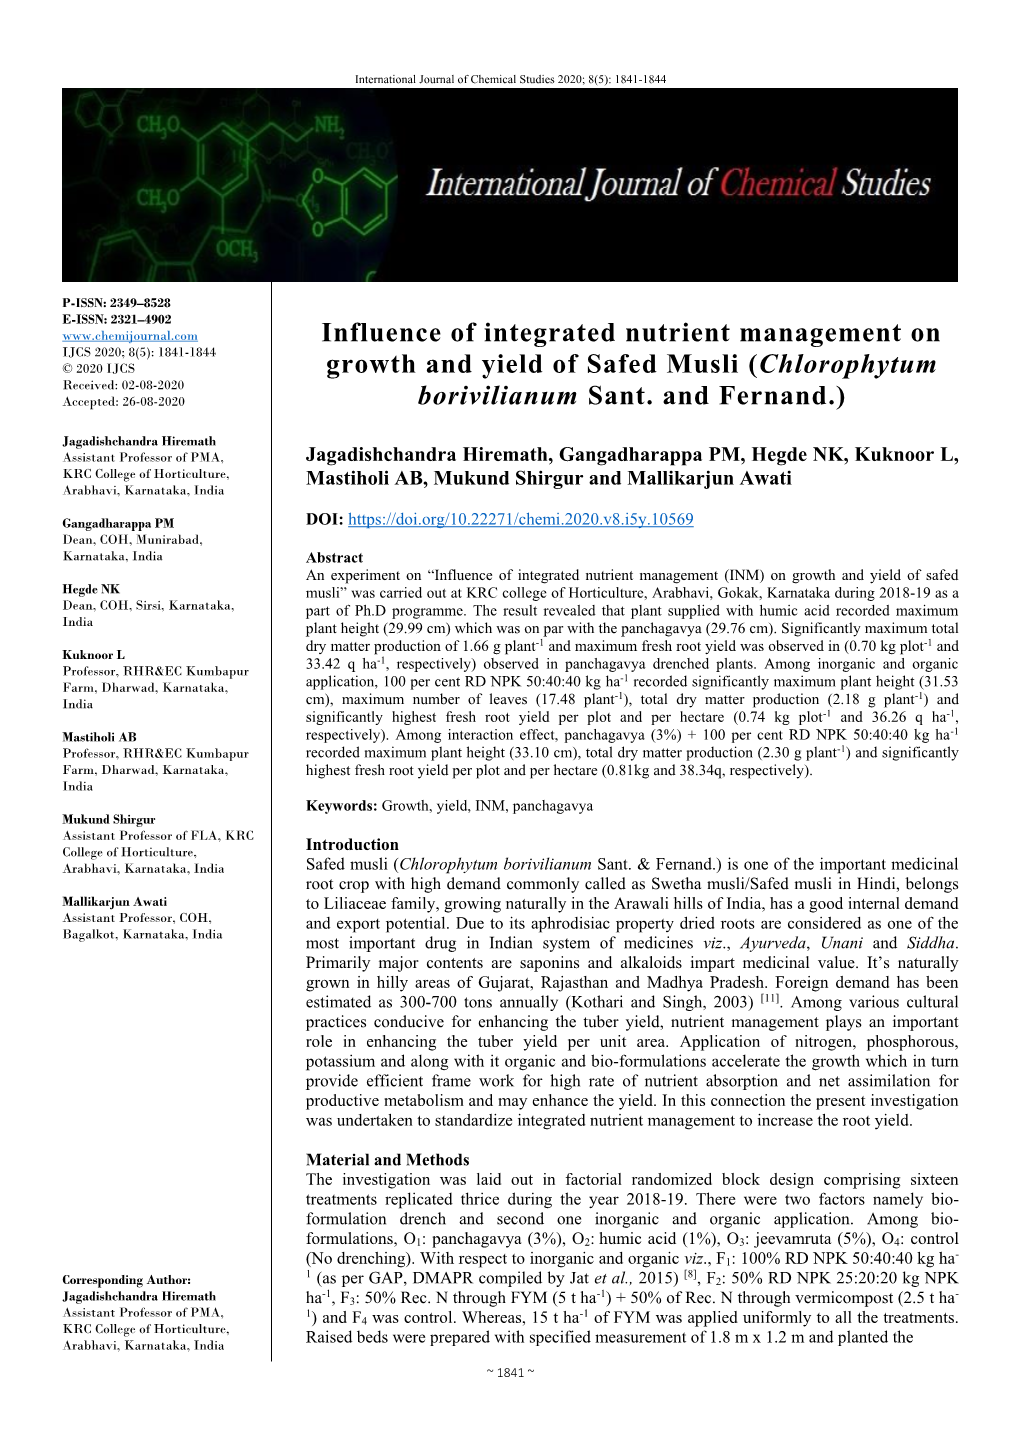 Influence of Integrated Nutrient Management on Growth and Yield Of